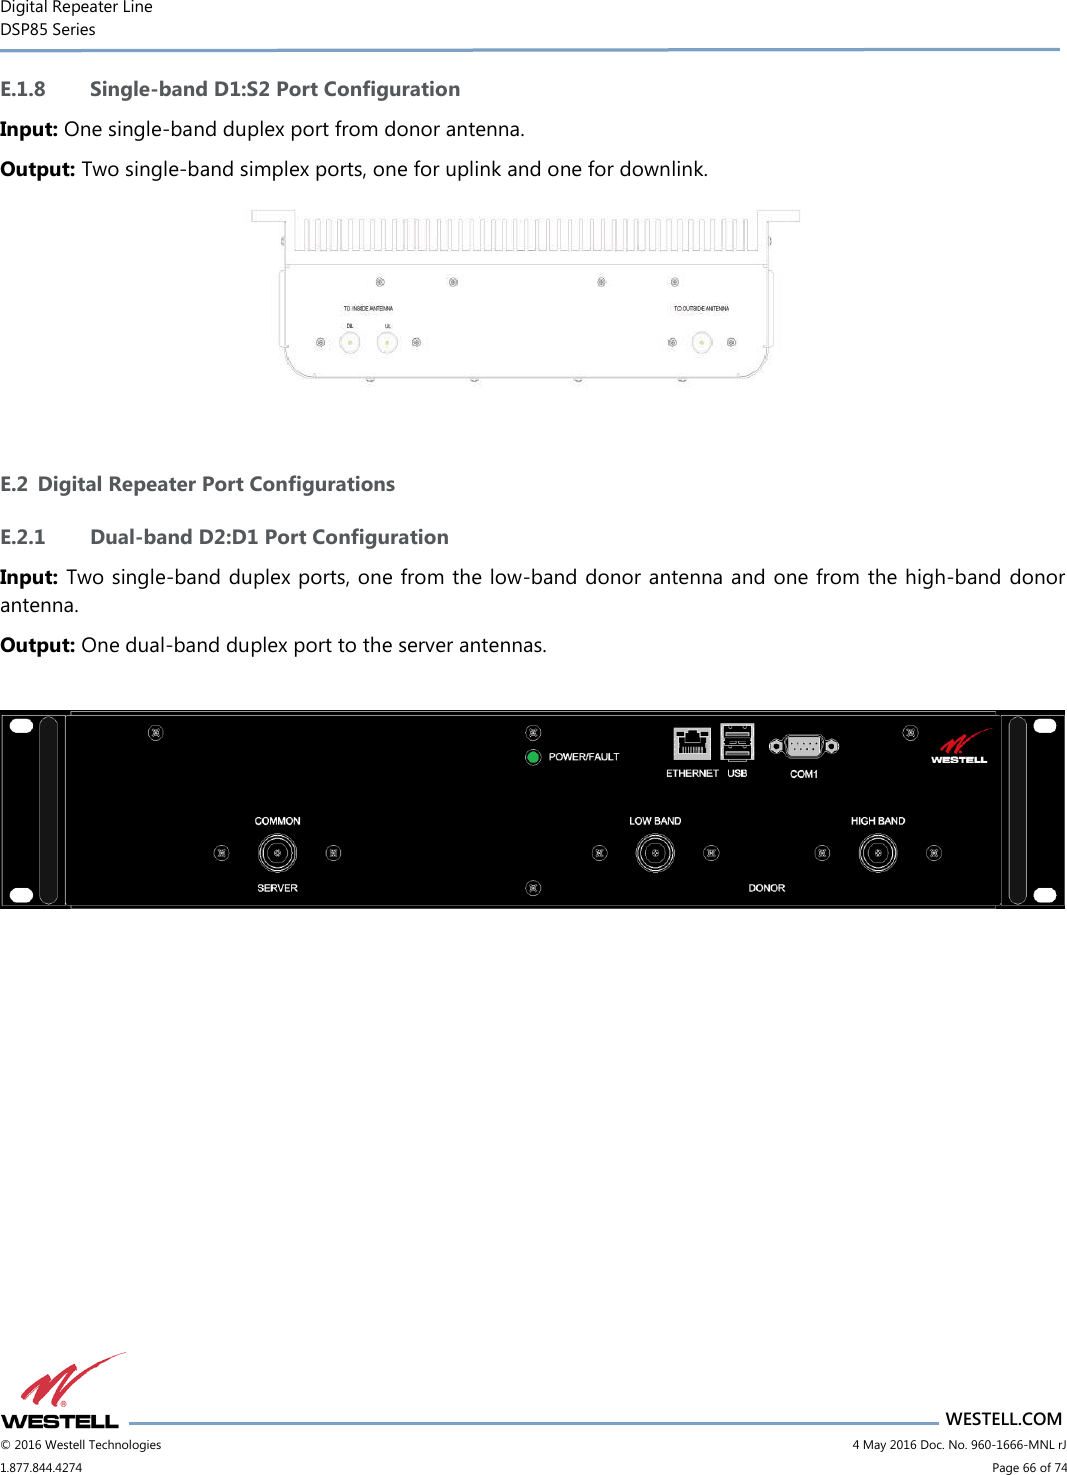 Digital Repeater Line DSP85 Series                       WESTELL.COM © 2016 Westell Technologies                           4 May 2016 Doc. No. 960-1666-MNL rJ 1.877.844.4274                             Page 66 of 74  E.1.8 Single-band D1:S2 Port Configuration Input: One single-band duplex port from donor antenna. Output: Two single-band simplex ports, one for uplink and one for downlink.   E.2 Digital Repeater Port Configurations E.2.1 Dual-band D2:D1 Port Configuration Input: Two single-band duplex ports, one from the low-band donor antenna and one from the high-band donor antenna. Output: One dual-band duplex port to the server antennas.      